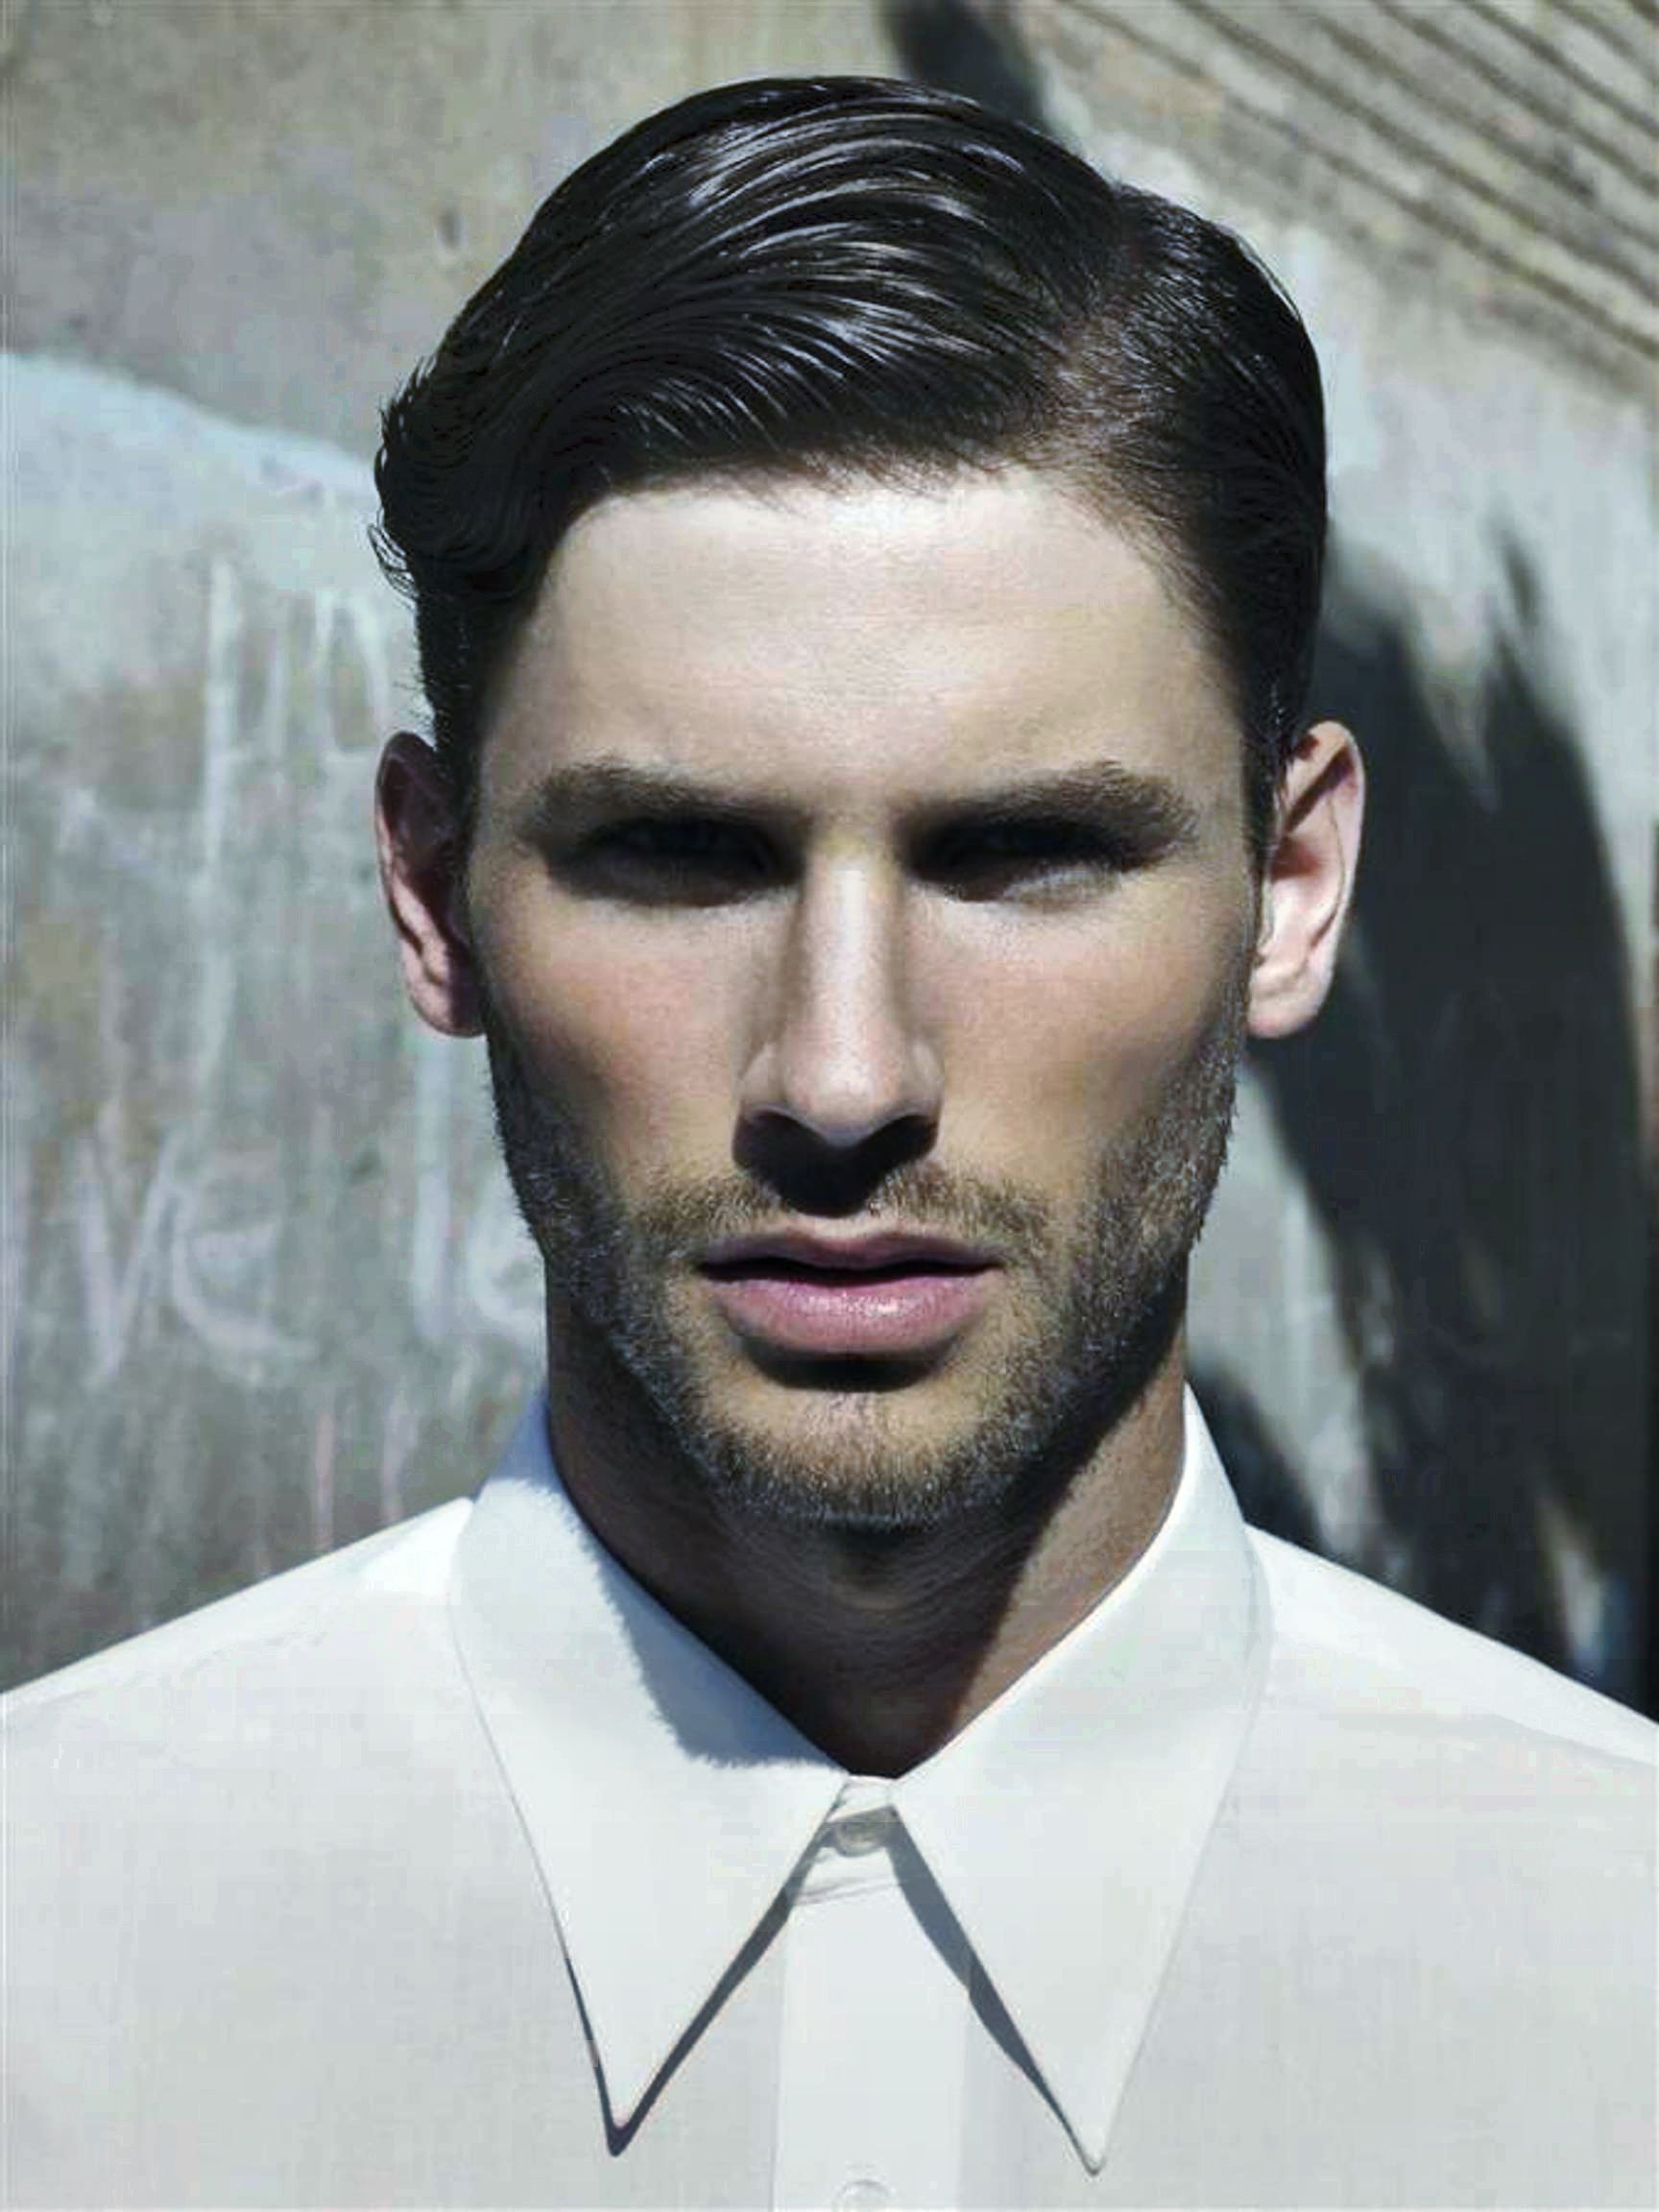 classy hairstyles for men ideas